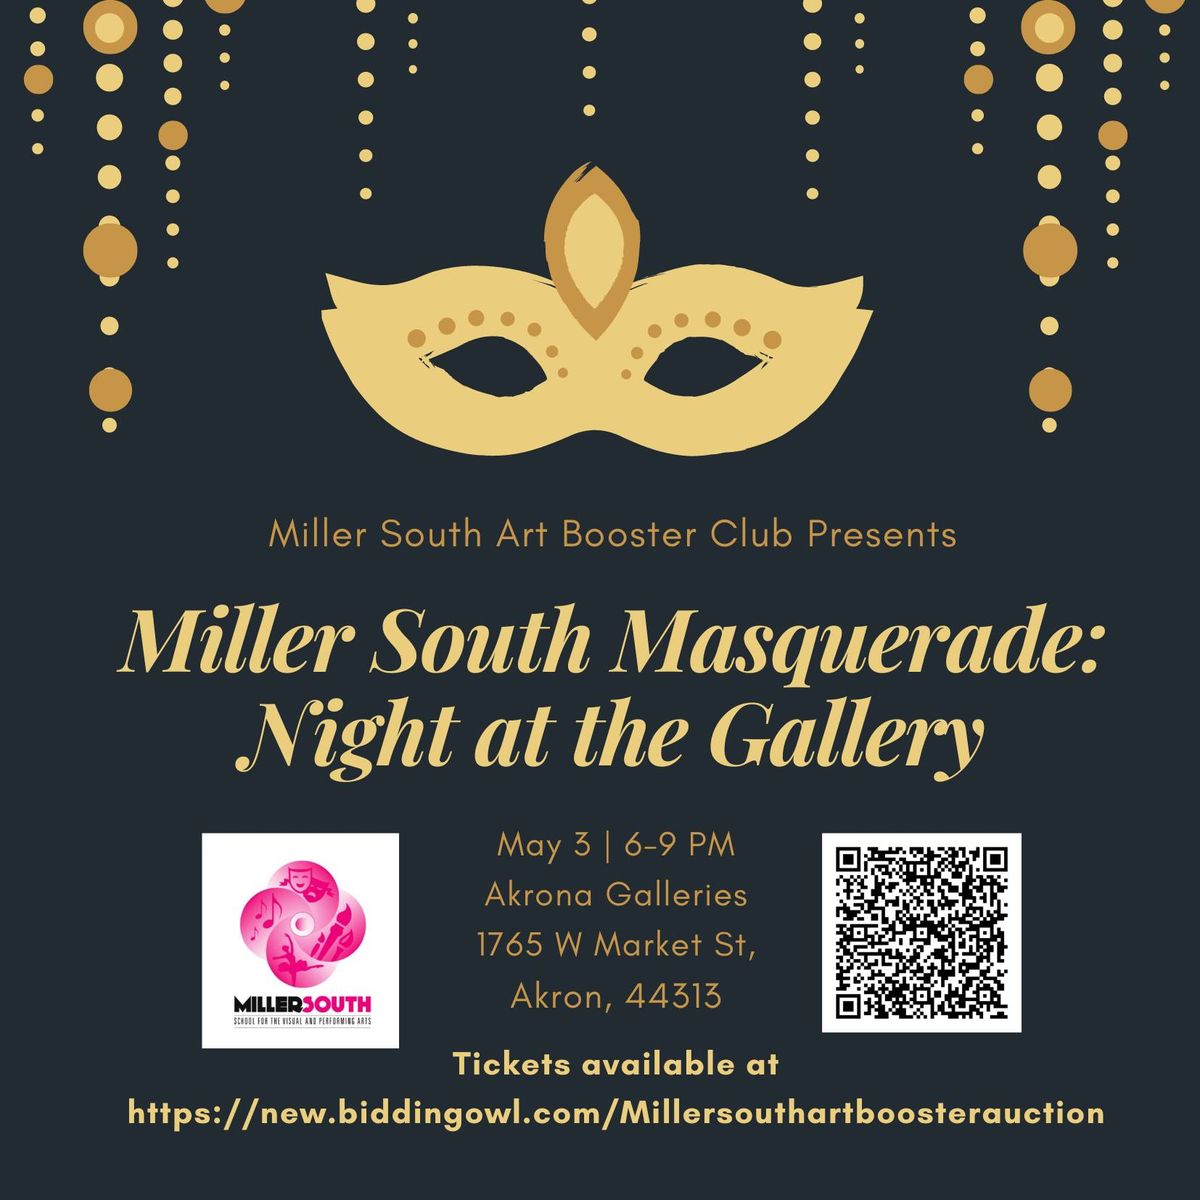 Miller South Masquerade: Night at the Gallery